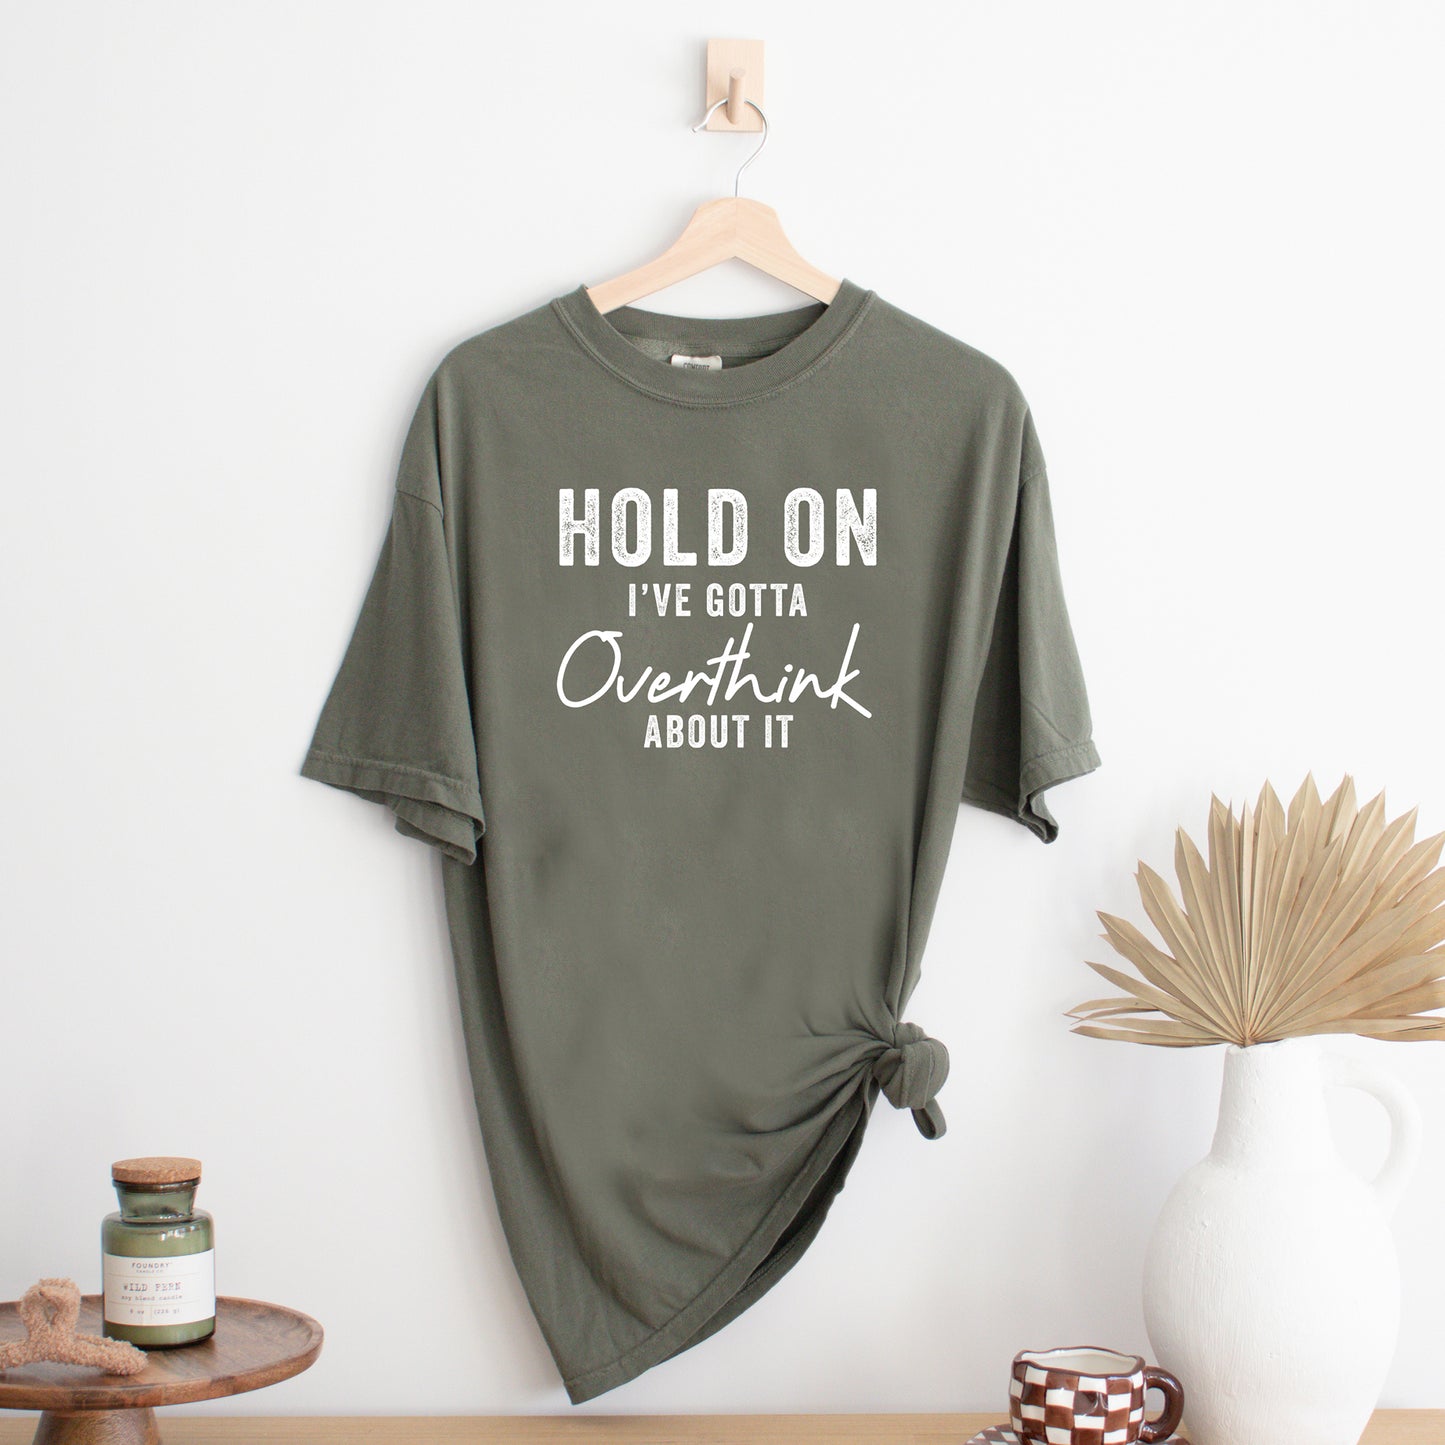 Hold On I've Gotta Overthink About It | Garment Dyed Short Sleeve Tee